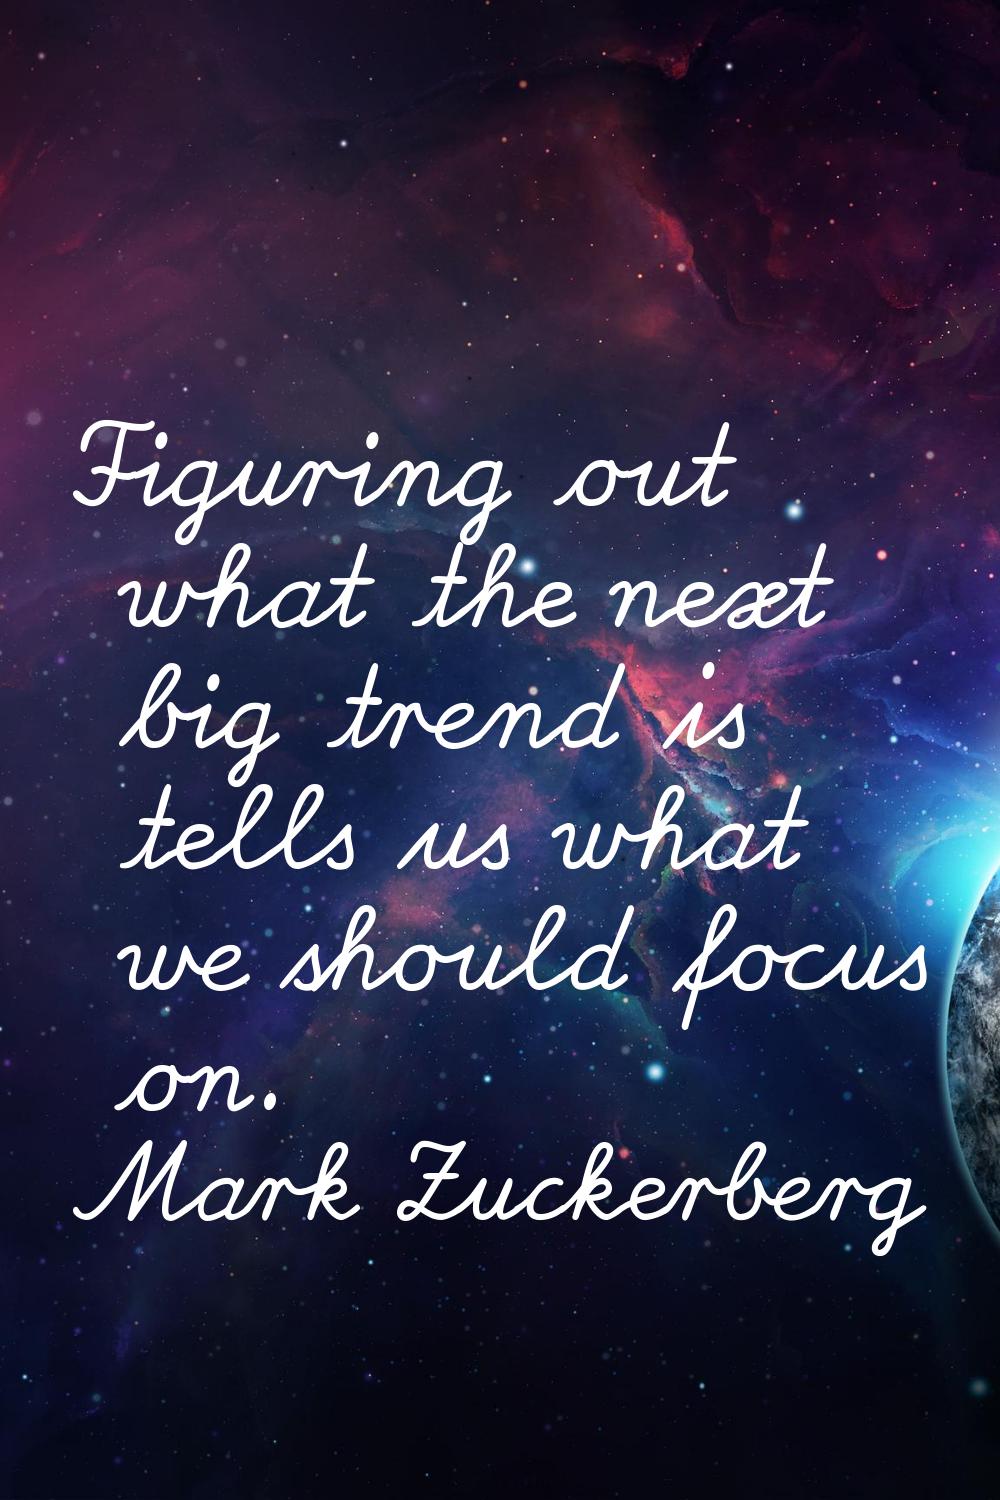 Figuring out what the next big trend is tells us what we should focus on.